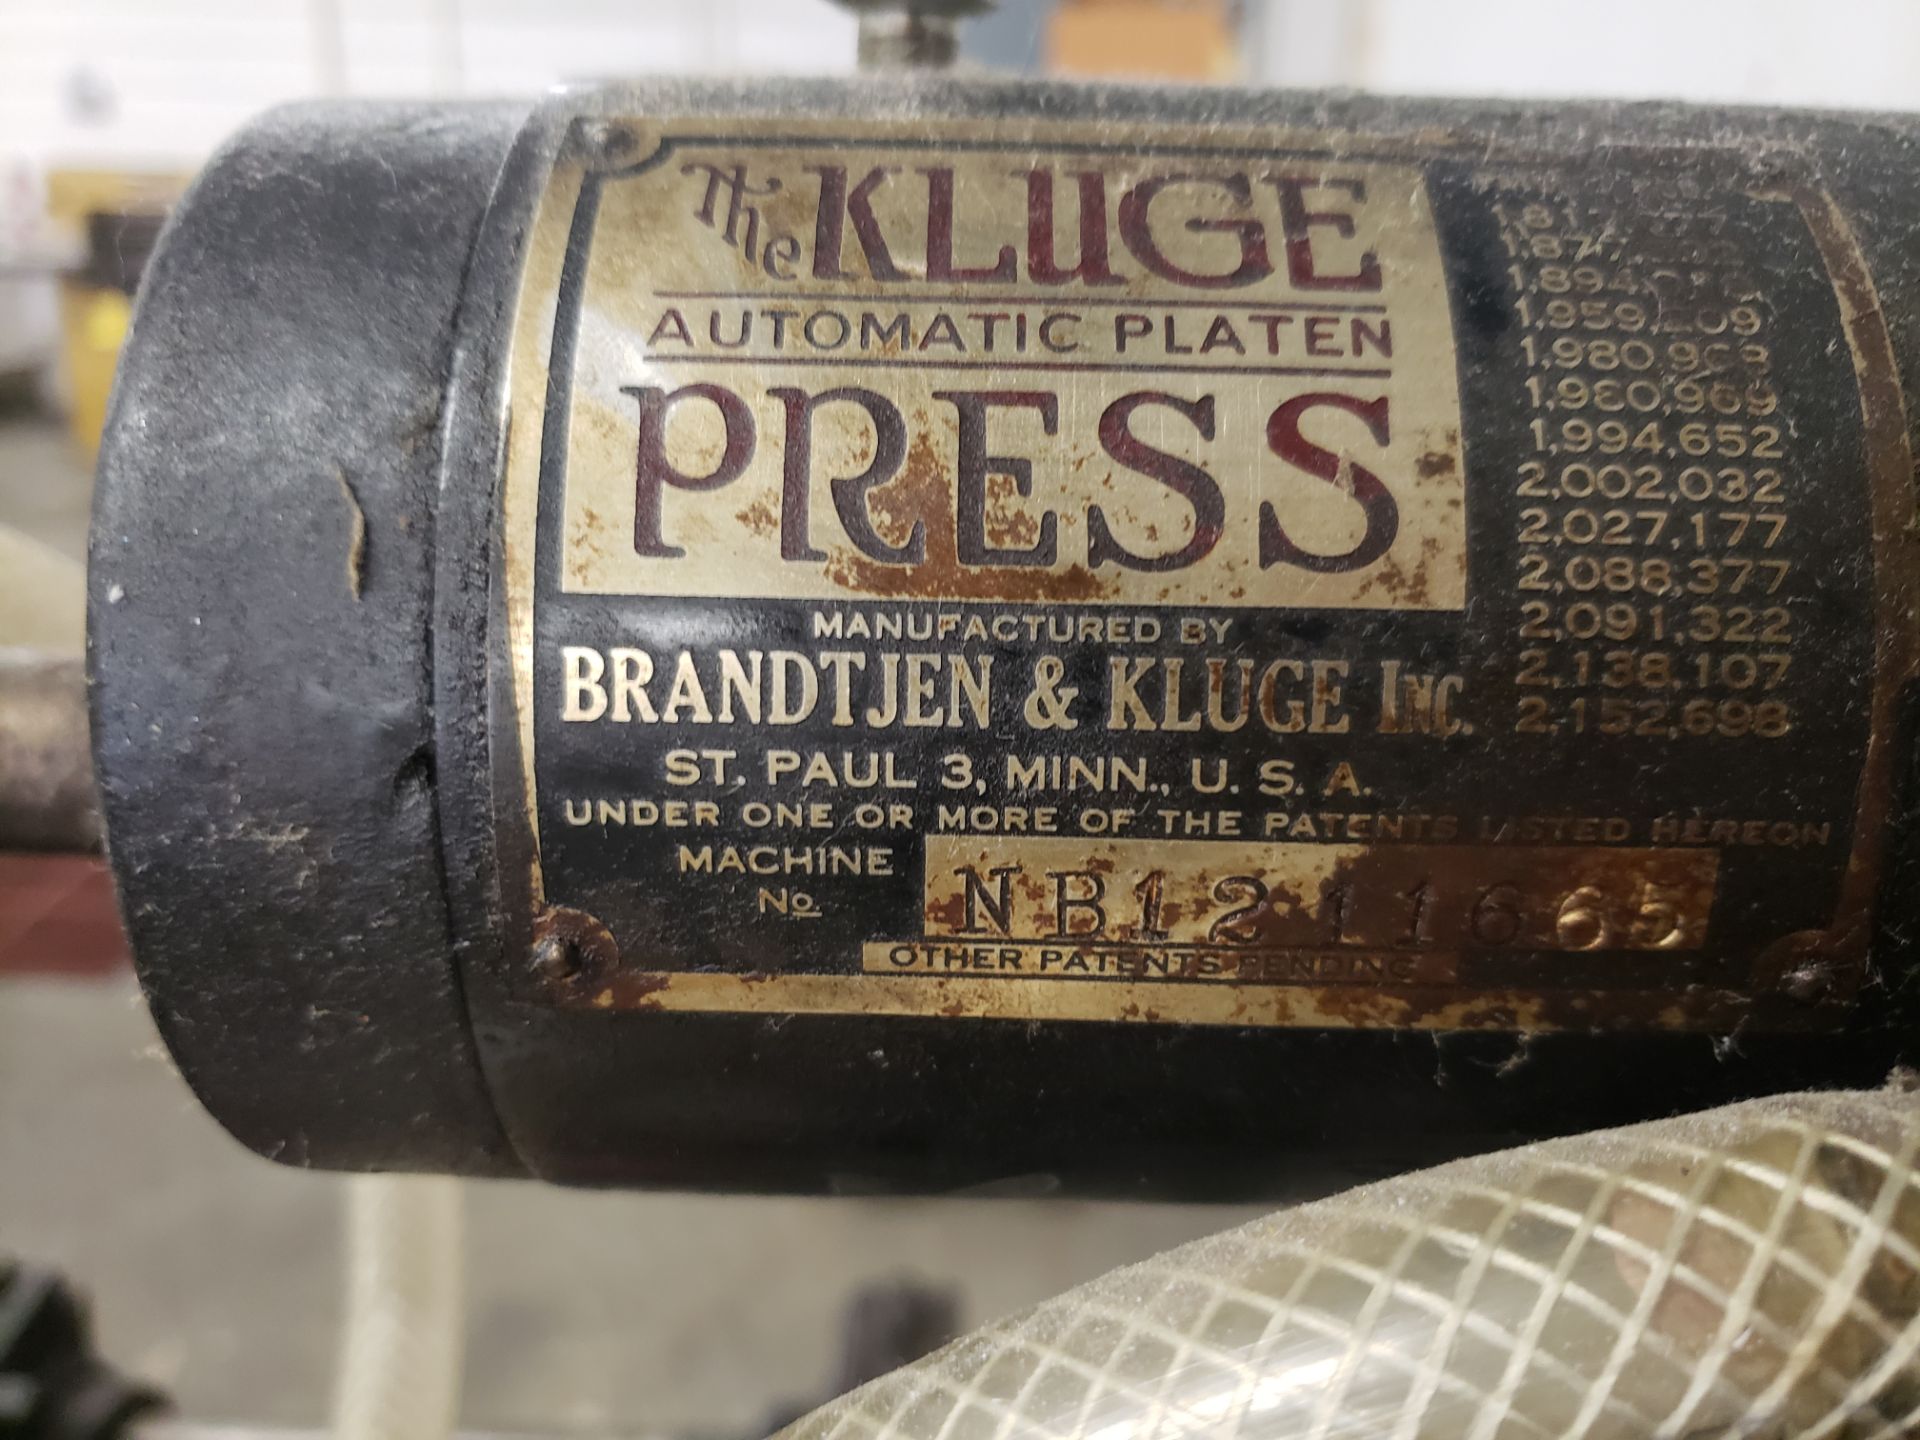 KLUGE AUTOMATIC PLATEN LETTER PRESS MACHINE# NB1211665 (LOCATED AT: 16335 LIMA ROAD BLDG. 4 - Image 3 of 3